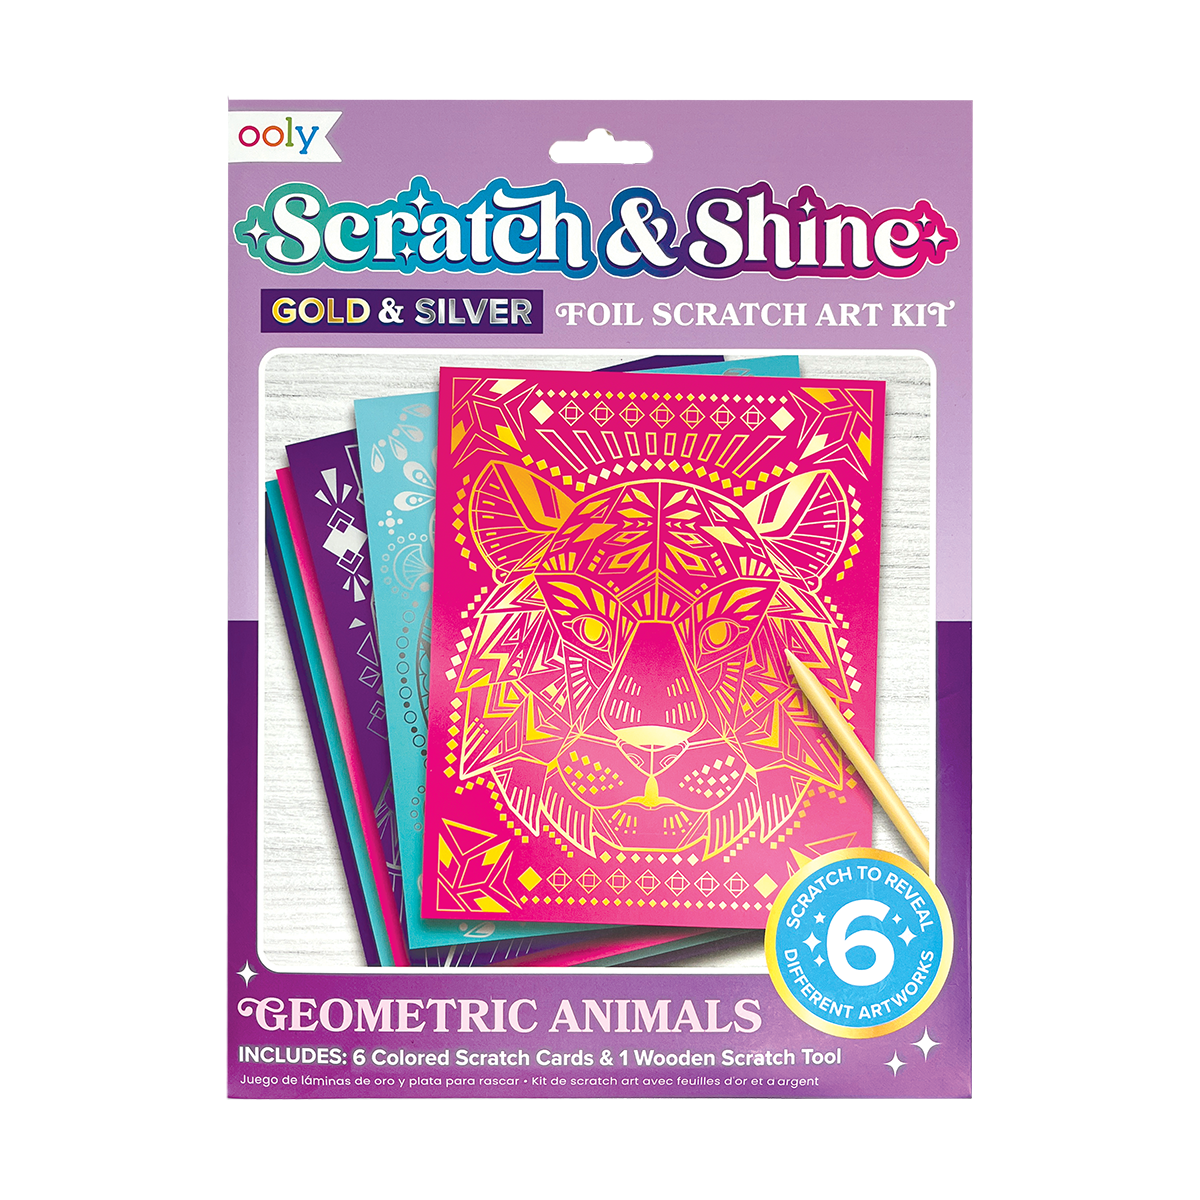 Scratch and Shine Foil Scratch Art Kit - Geometric Animals by OOLY